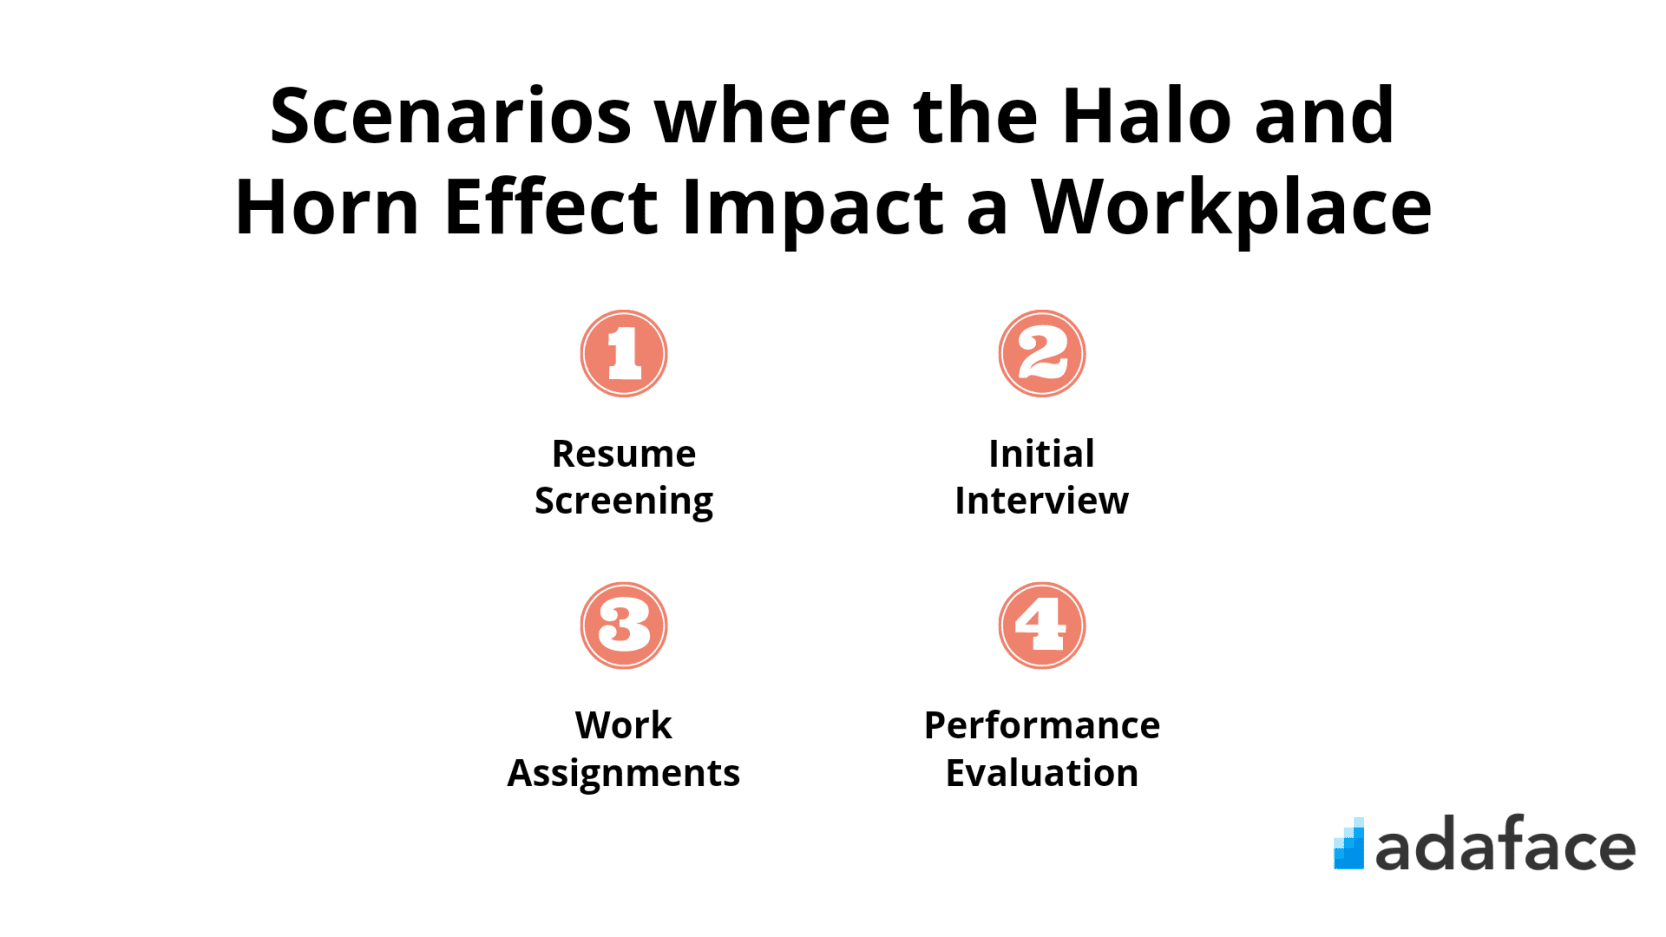 Scenarios where the halo and horn effect impact a workplace